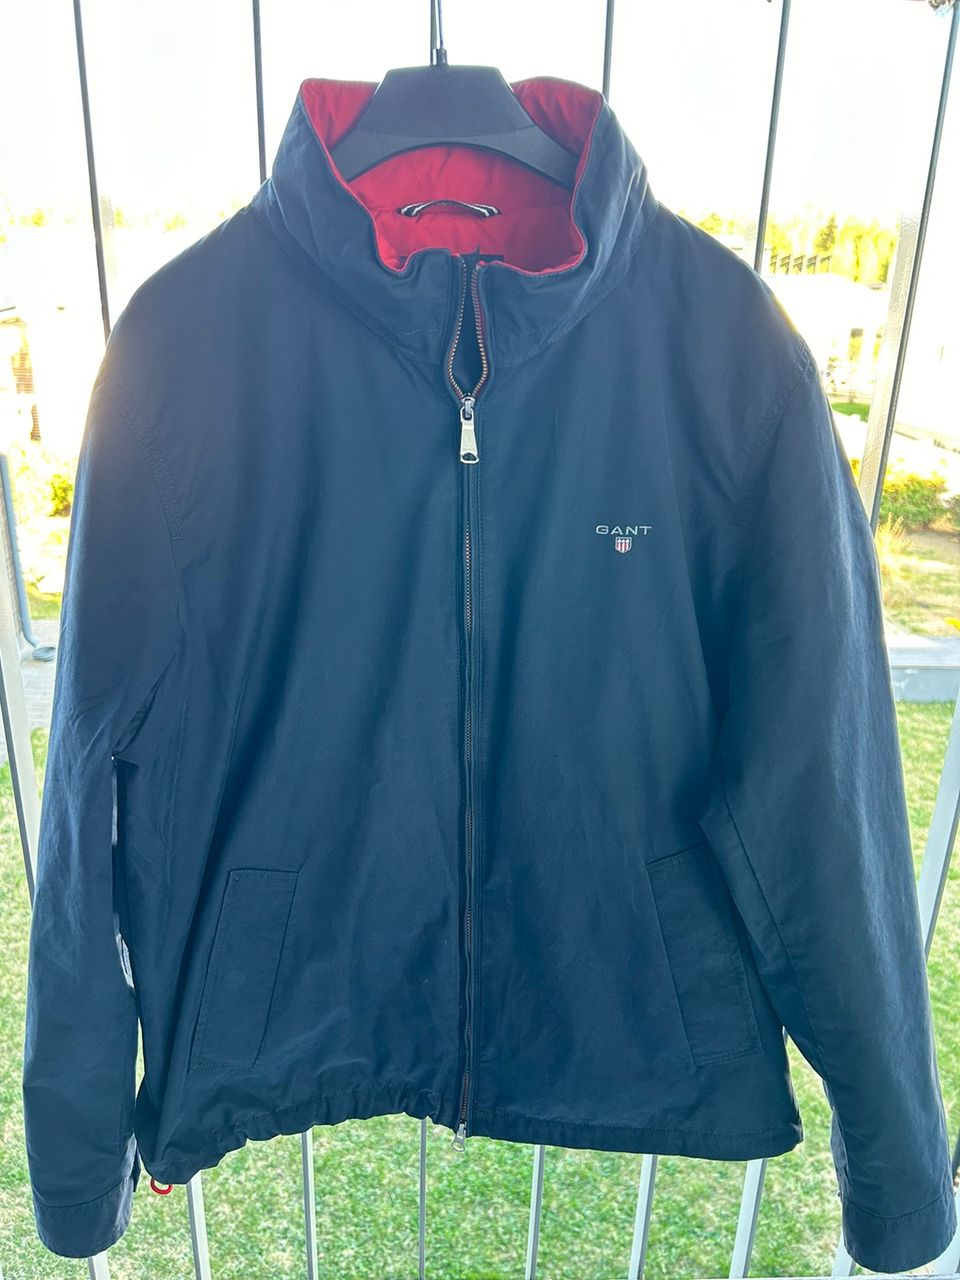 Gant, the midlenght jacket, M